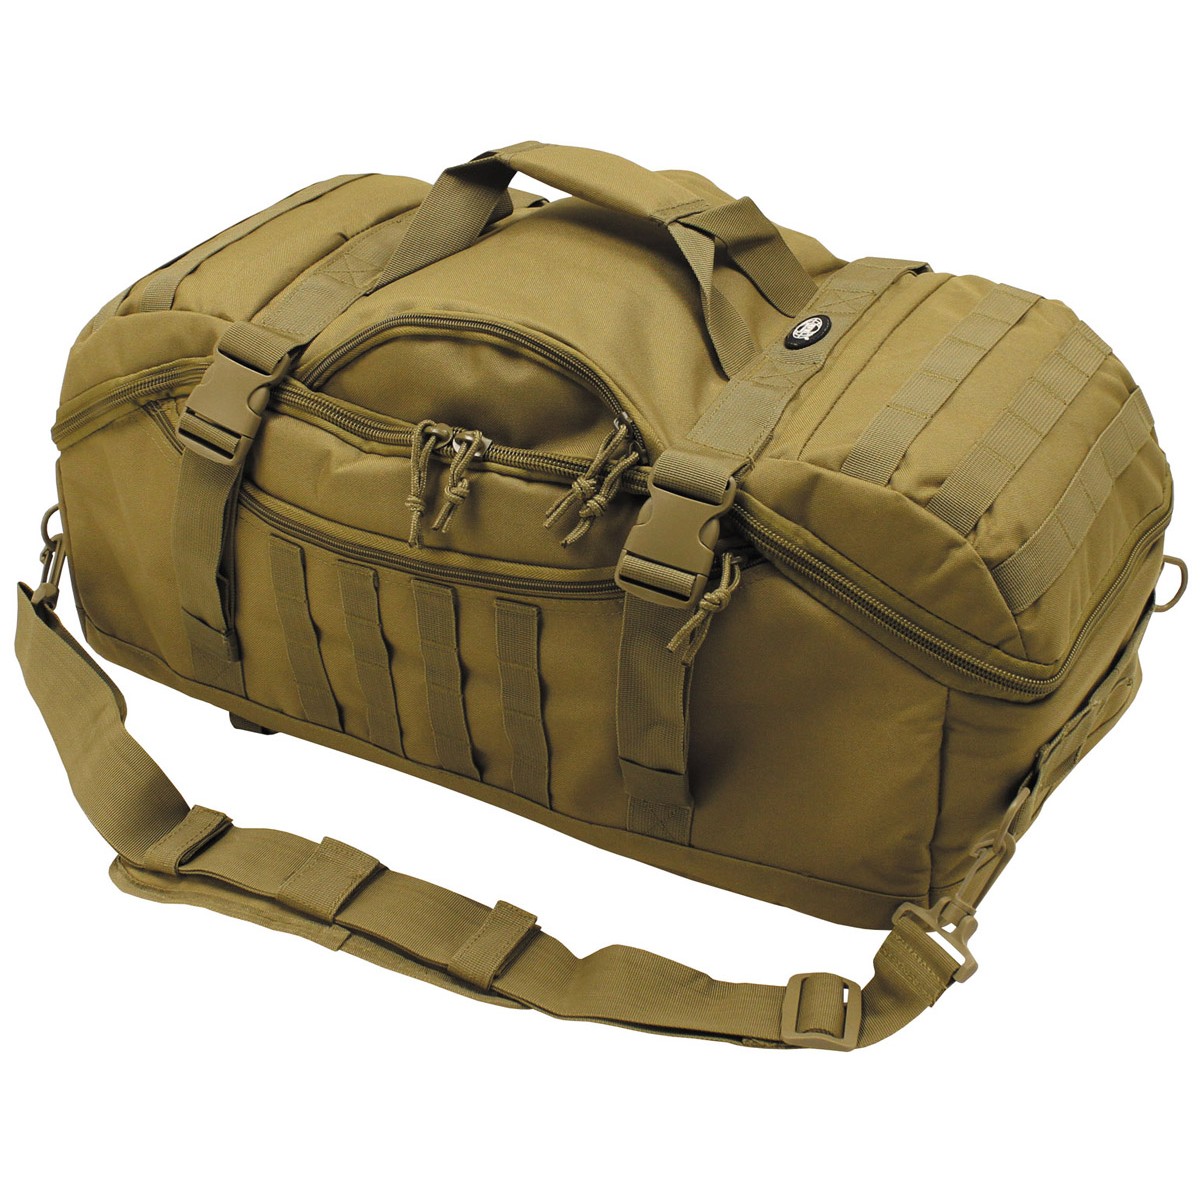 Military Tactical Shooters Multiwear Transport Travel Bag 48L Coyote